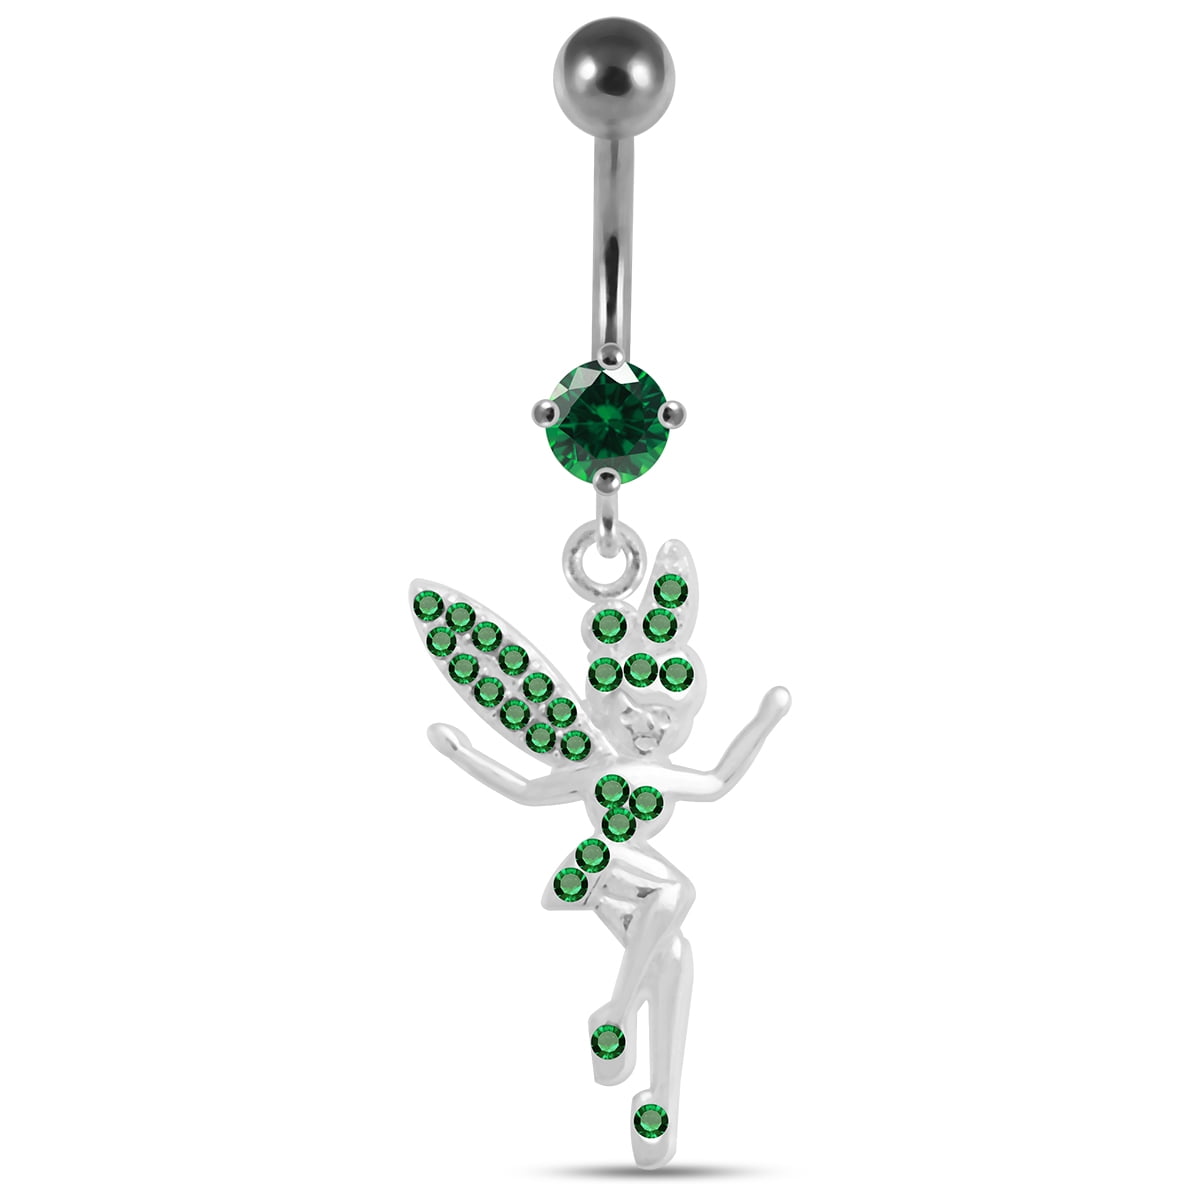 Silver Belly Rings Round CZ Crystal Gemstone with Multi Crystal Cute Cat Dangling 925 Sterling Body Jewelry